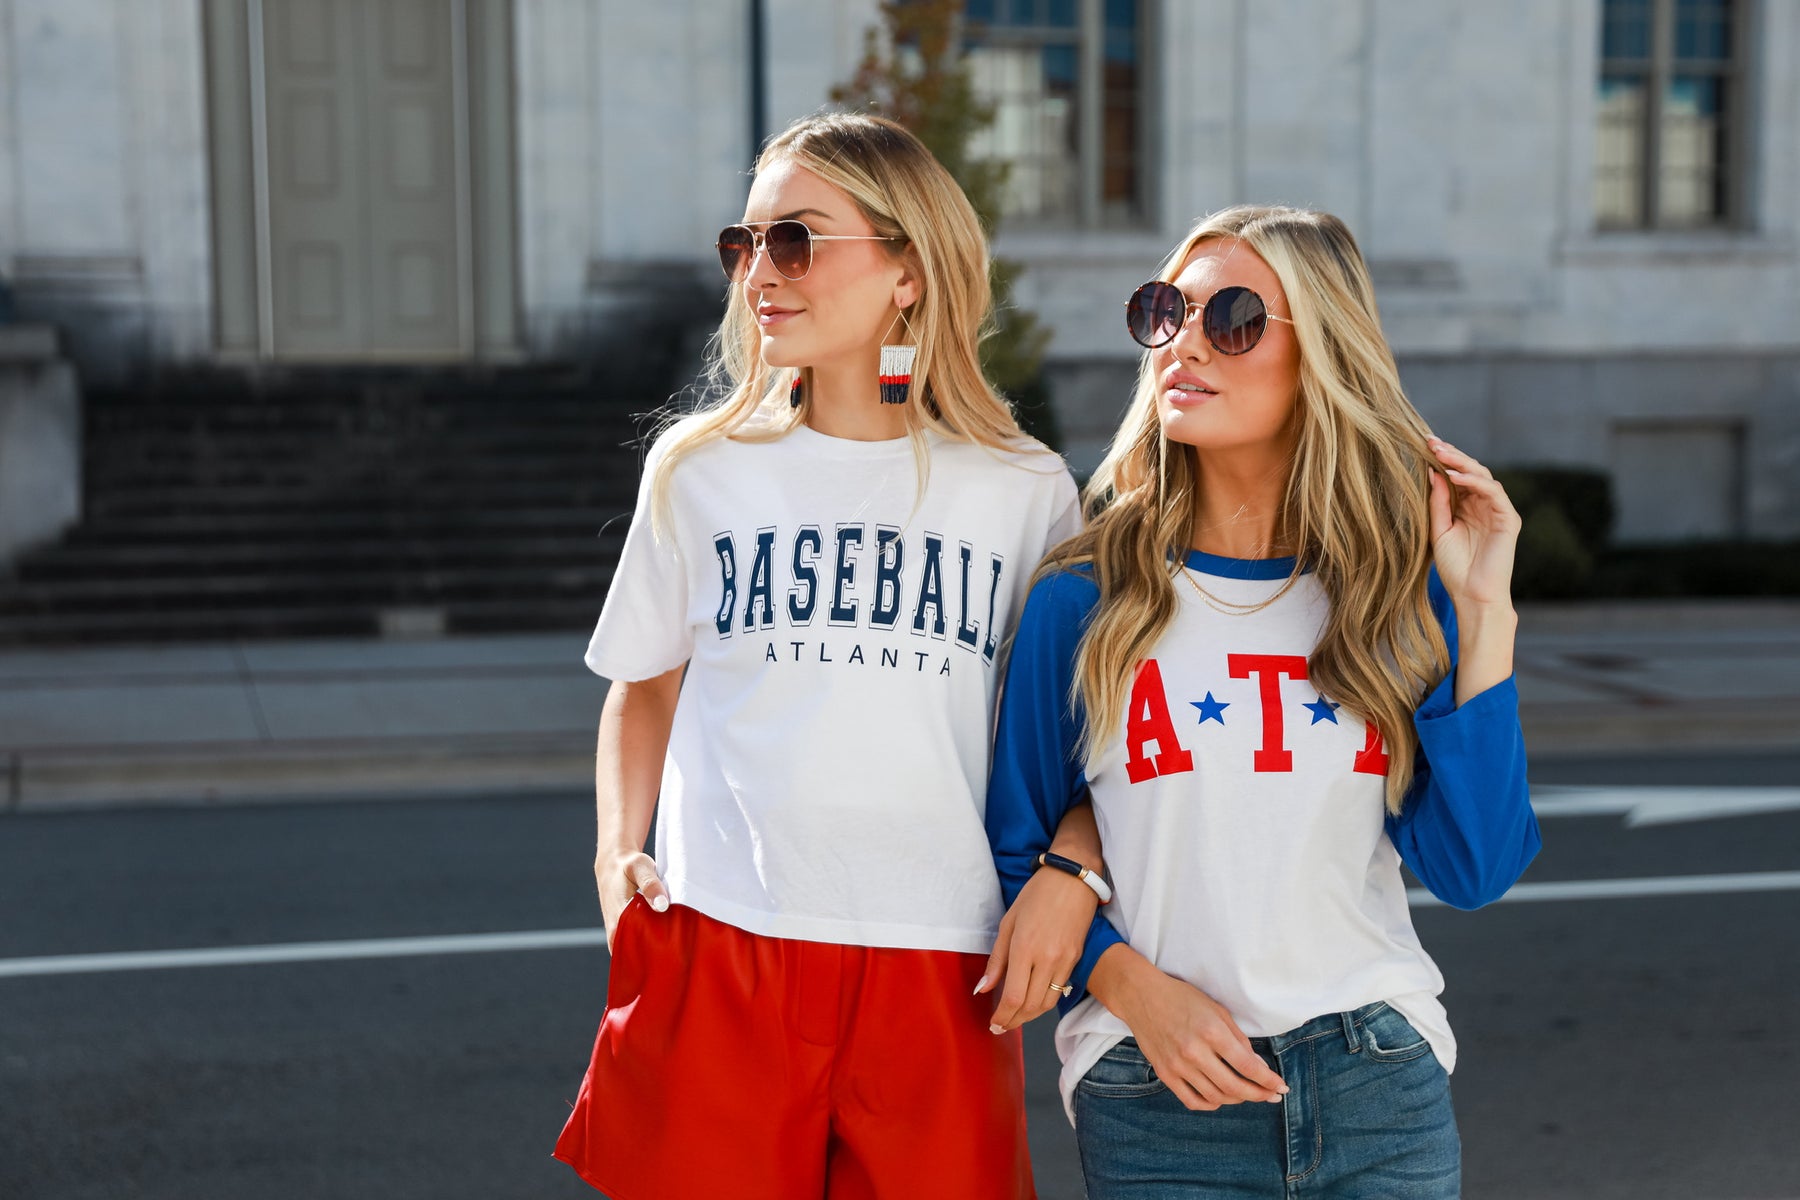 cute game day outfits for braves game. atlanta baseball tee. atlanta baseball t-shirt. atlanta women's clothing store.